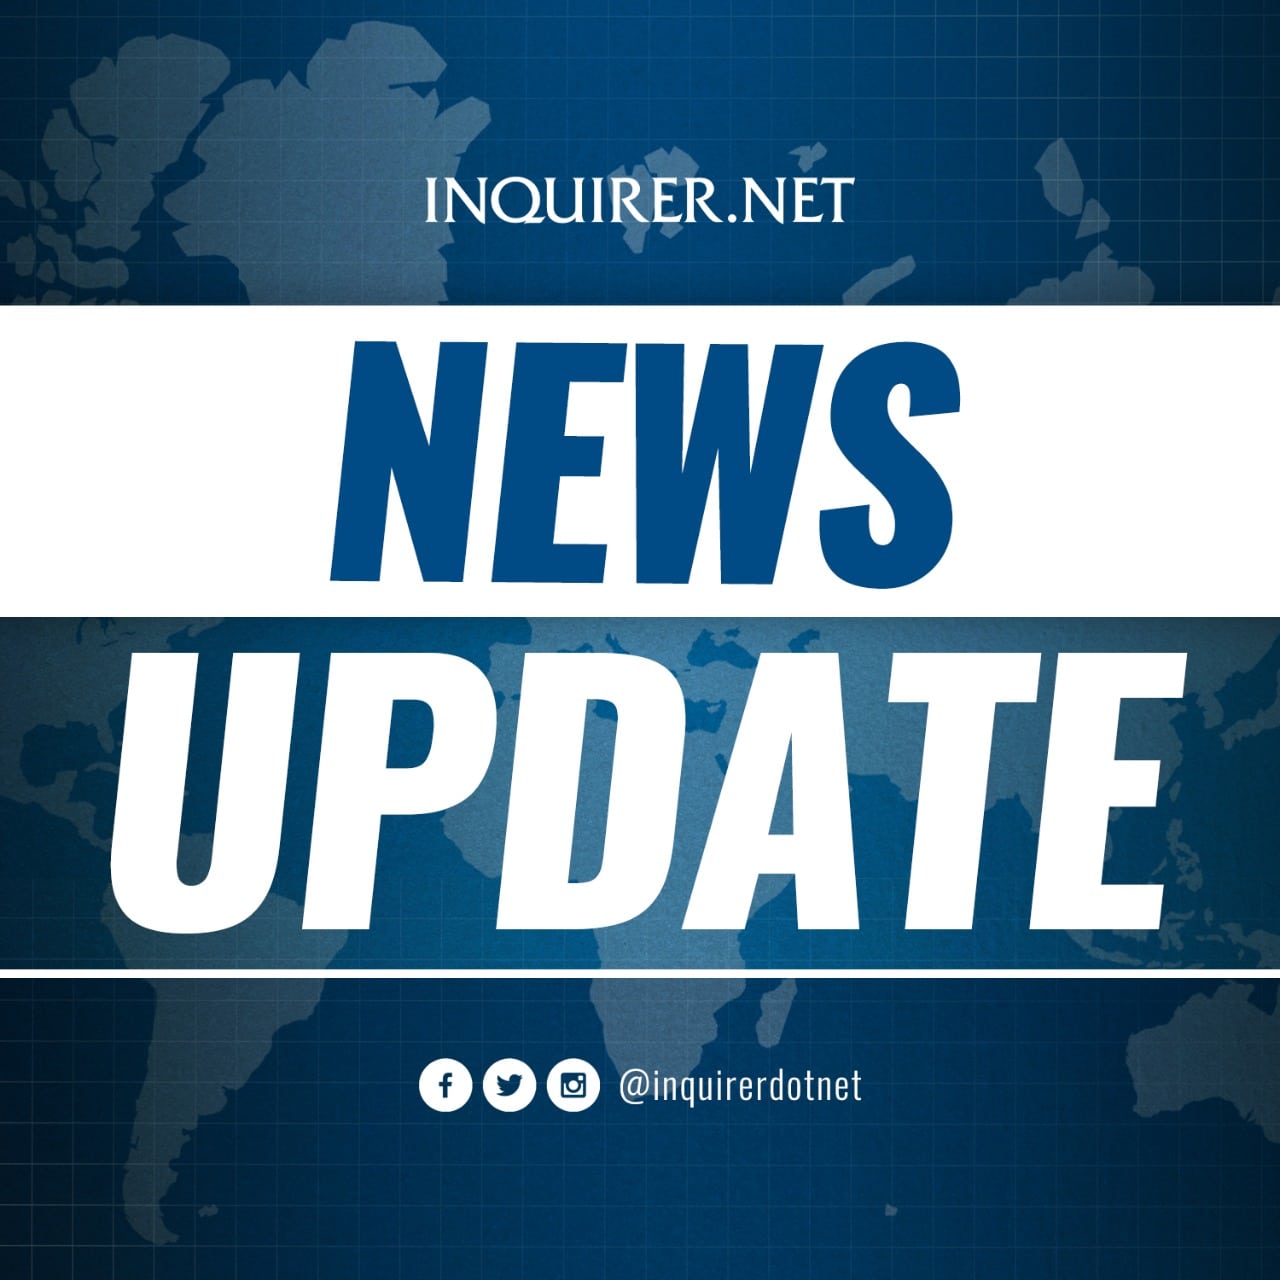 At least four domestic flights were canceled as of 2:45 p.m. Tuesday, the Manila International Airport Authority (MIAA) said, citing inclement weather.